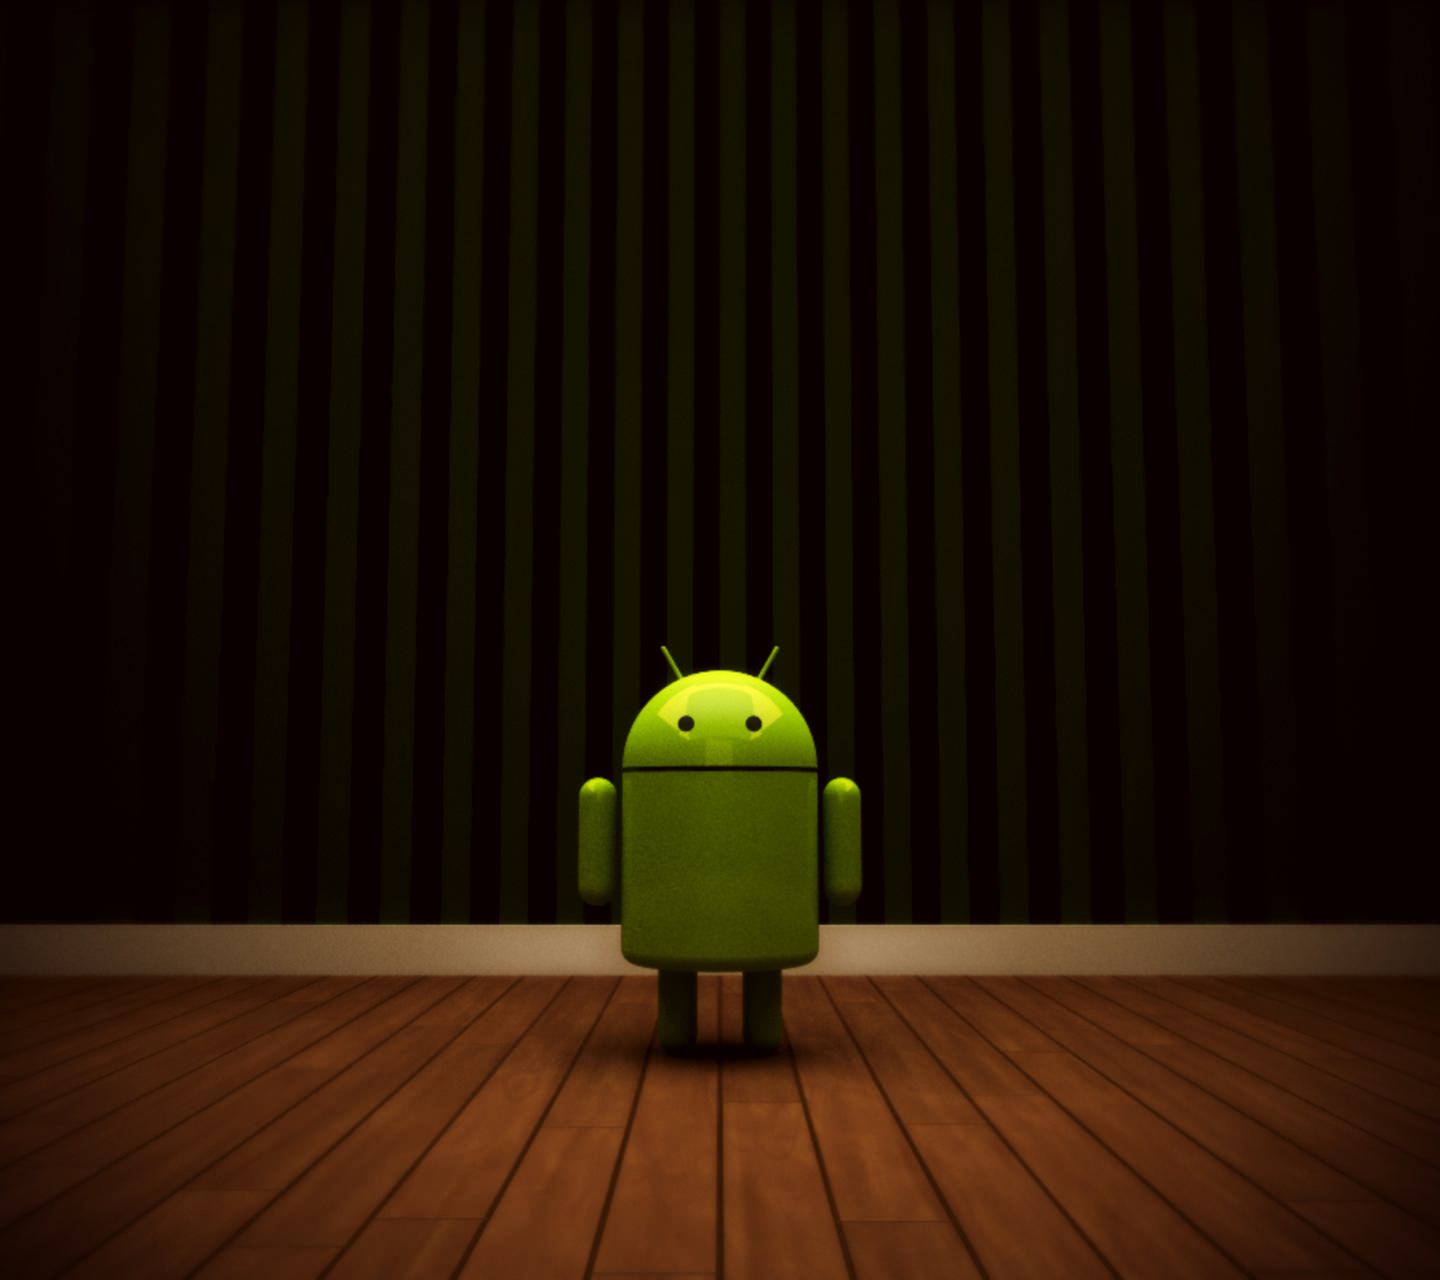 Android Smart Phone Wallpaper